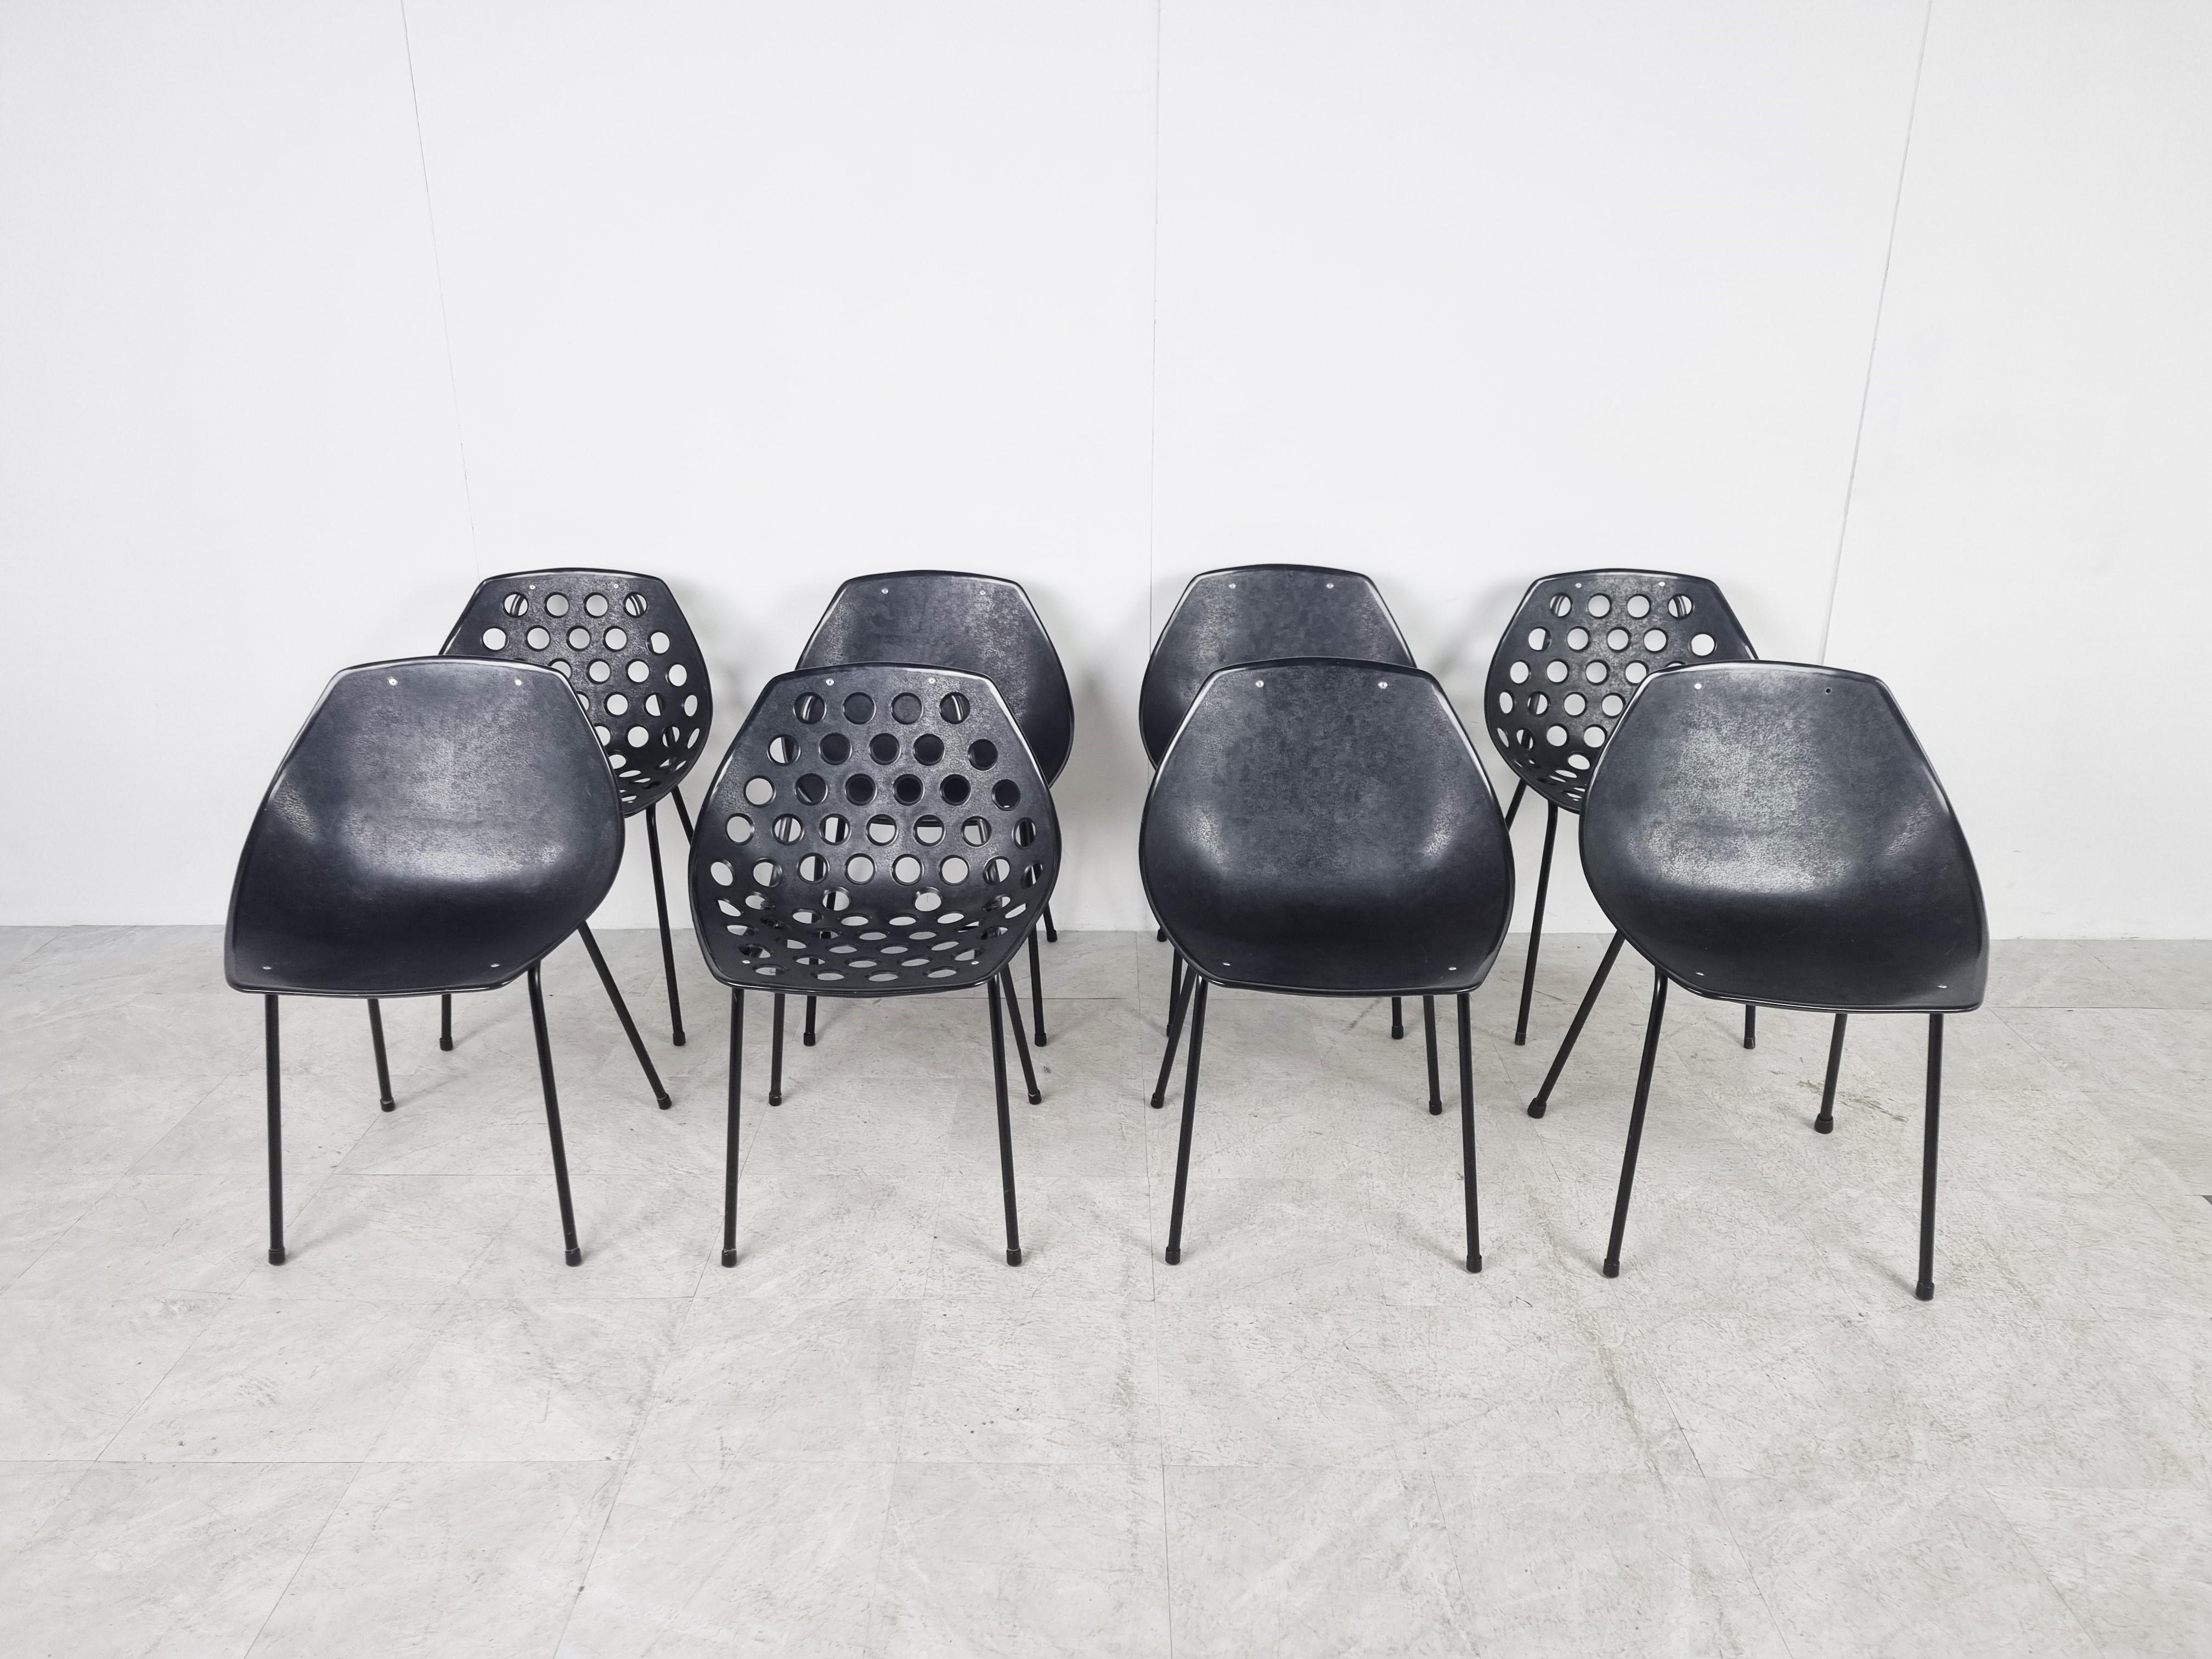 Set of 8 vintage coquillage chairs by French designer Pierre Guariche for Meurop.

This set of chairs is made from a plastic shell mounted on an elegant black metal base

Both in and outdoor use is possible.

set of 8 (3 with holes and 5